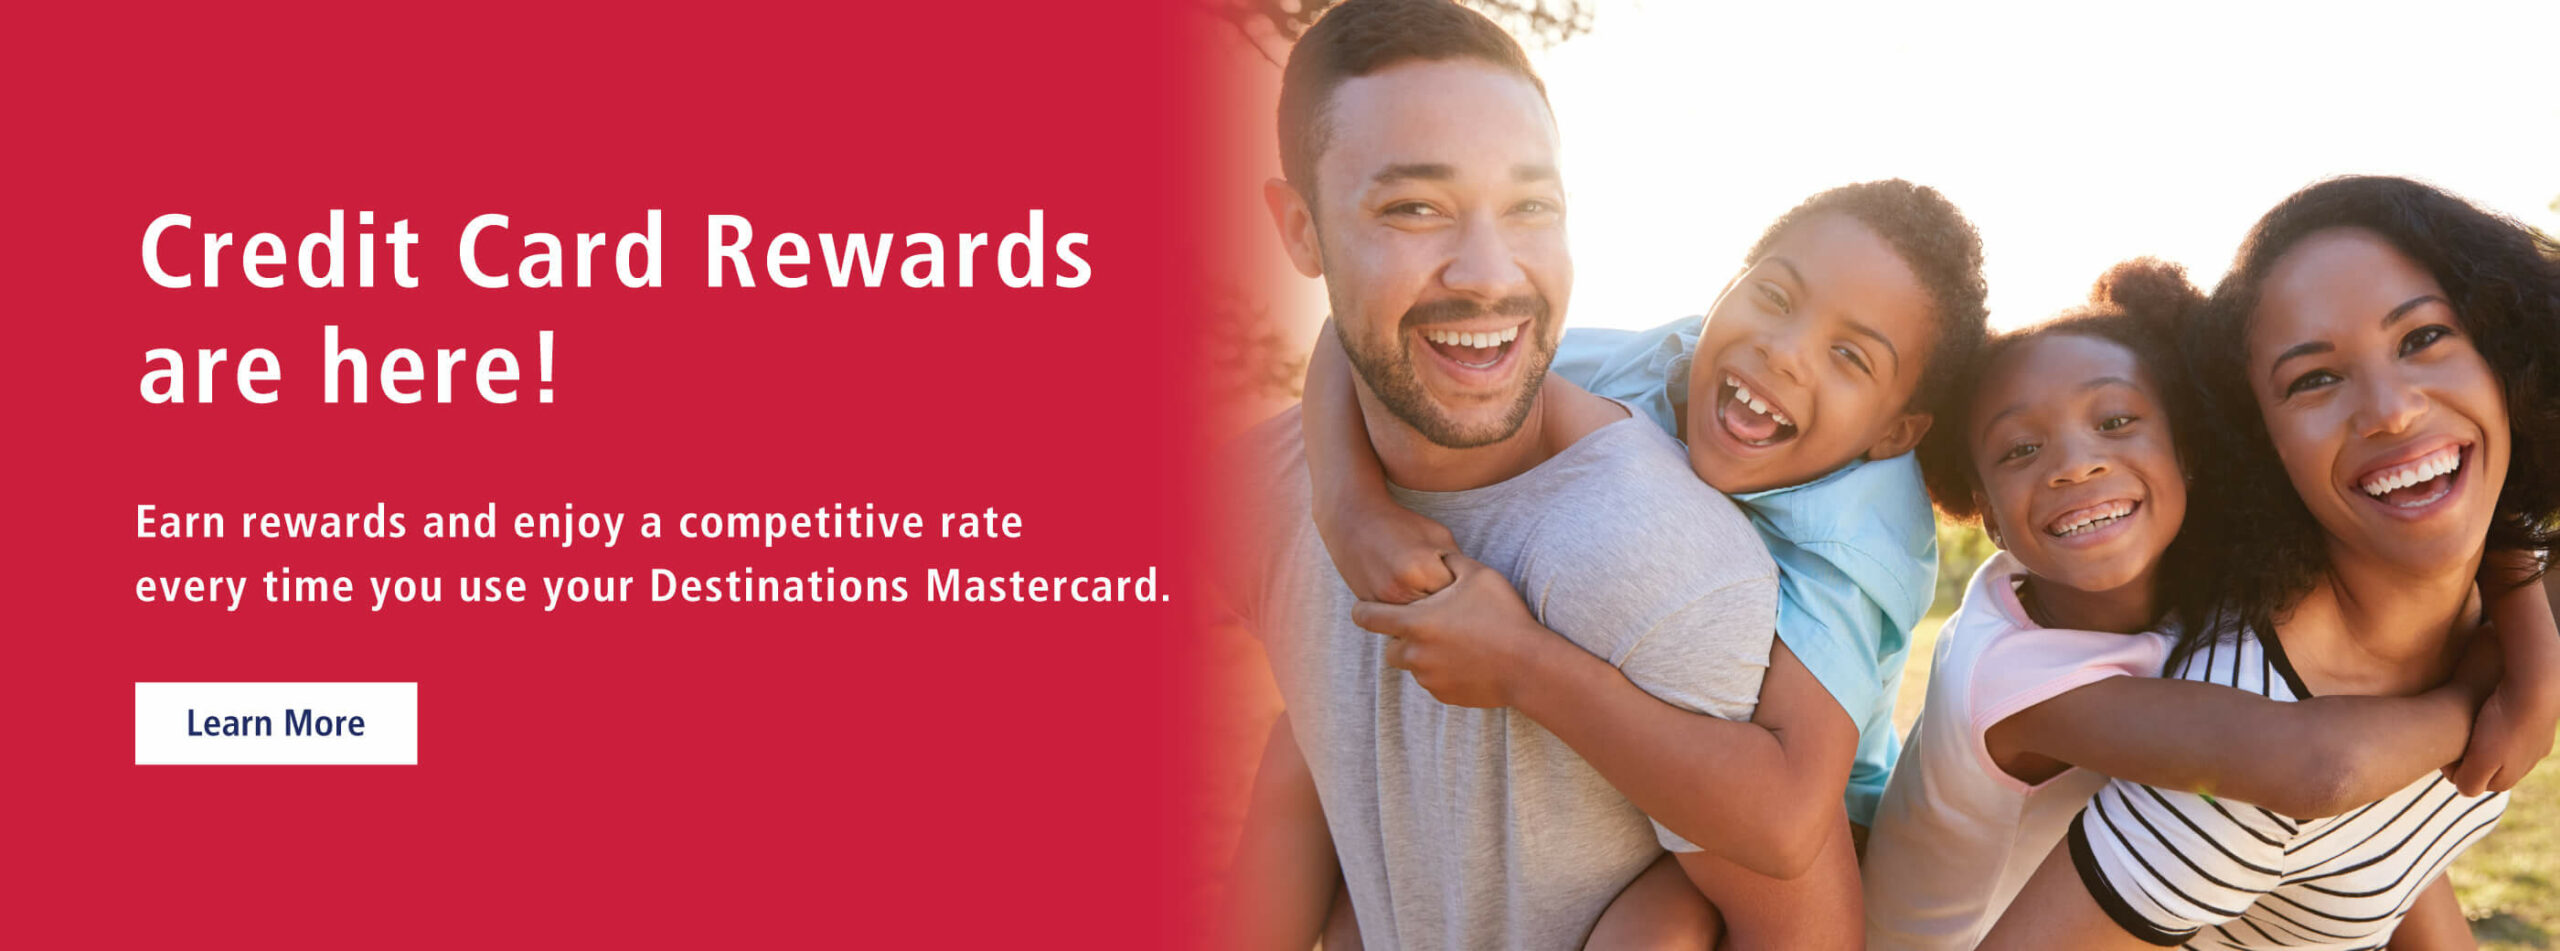 Family happily smiling with text to the left, "Credit Card Rewards are here"